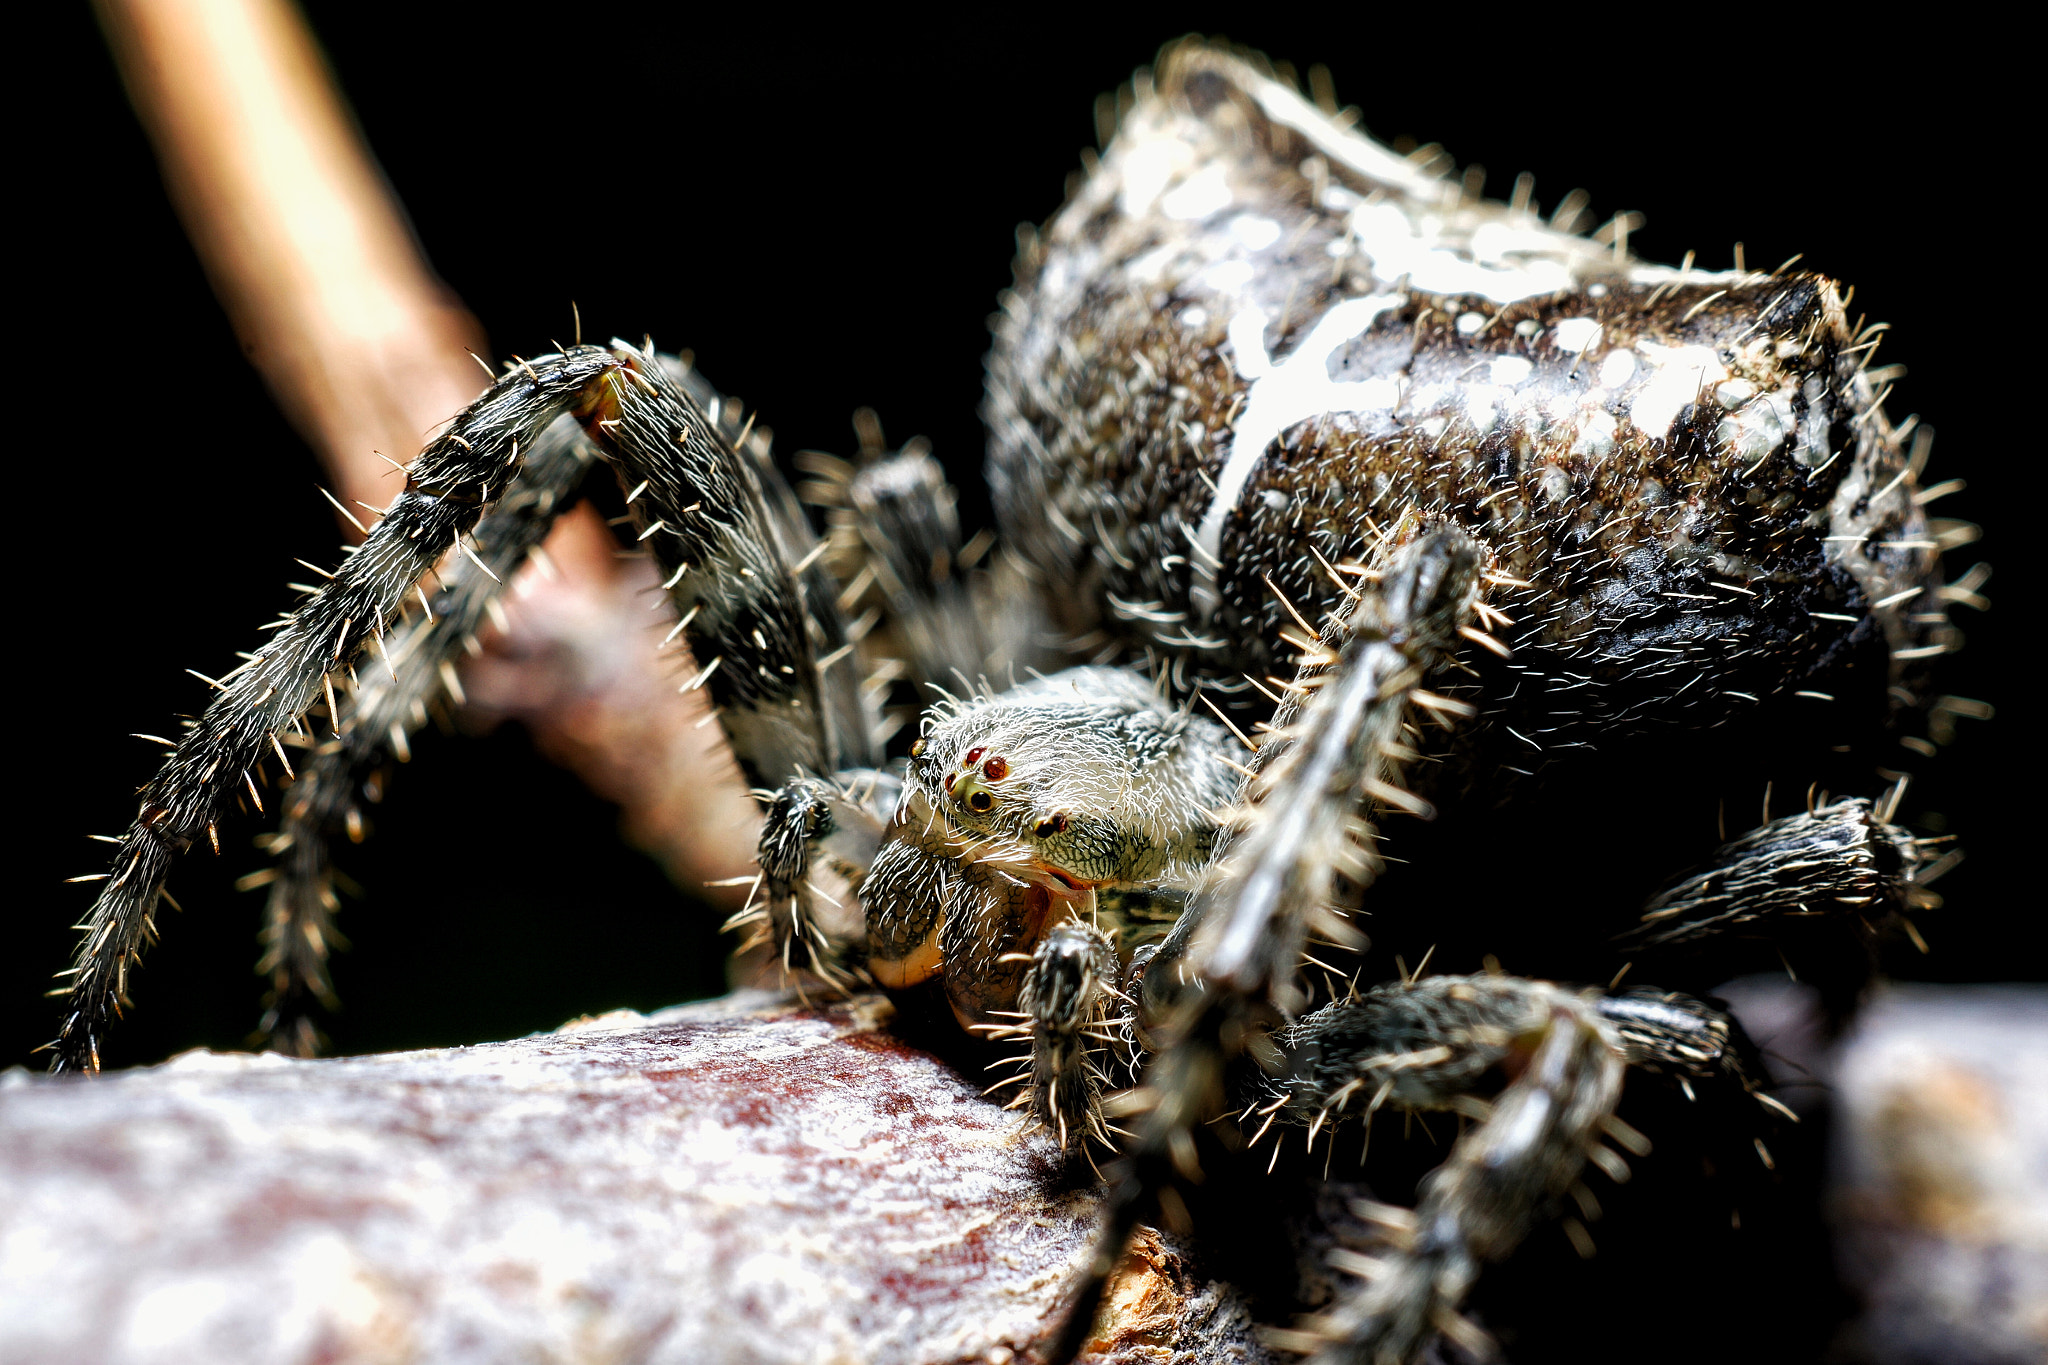 Pentax K-3 sample photo. Don't know what kind of spider this is but it's freaky! photography